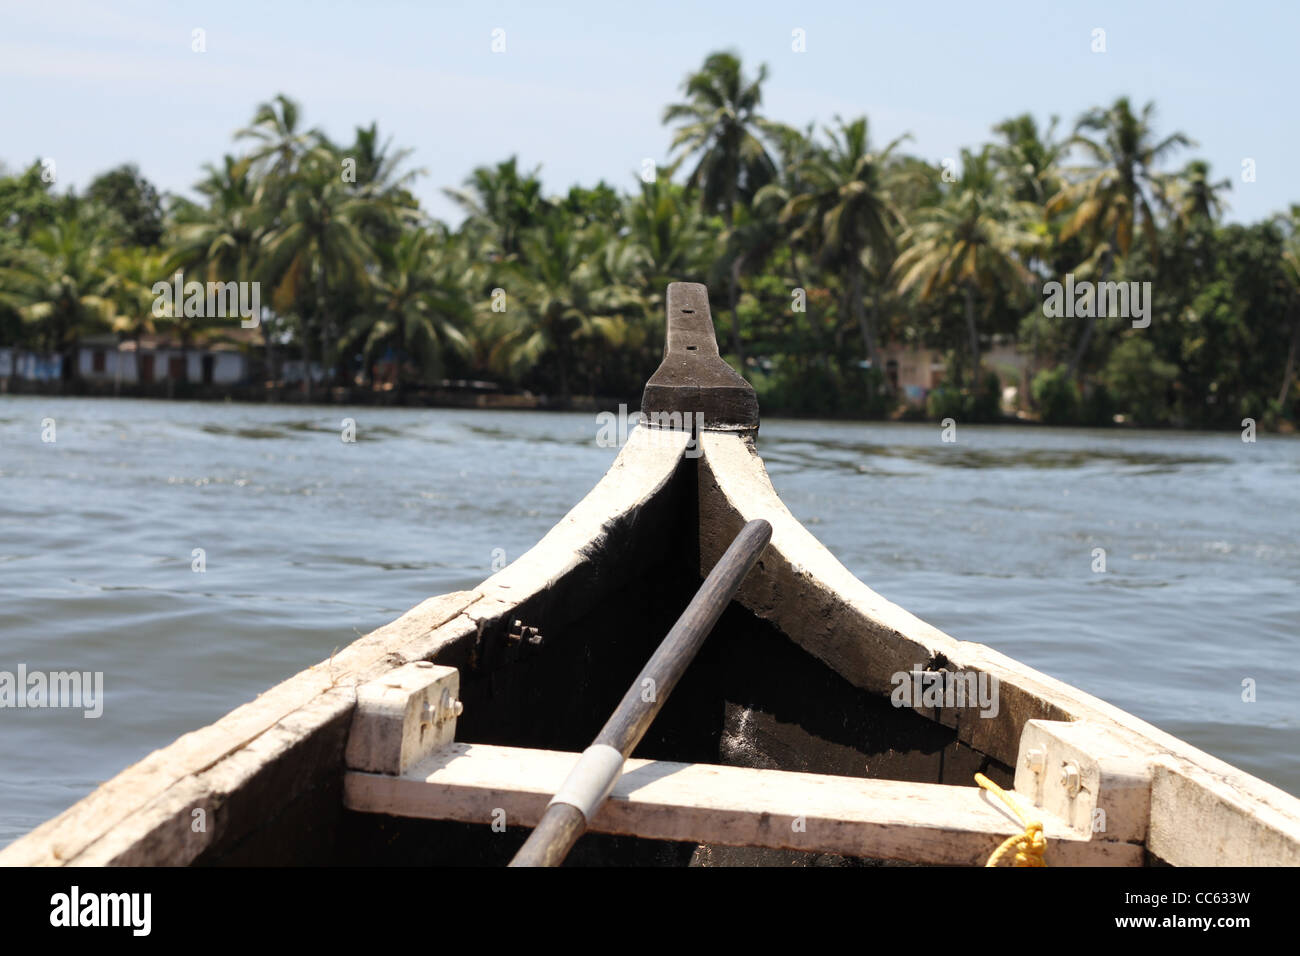 A passenger view from the front of a canoe on a beautiful backwater cruise in Kerala Southern India looking out to a palm bank. Stock Photo